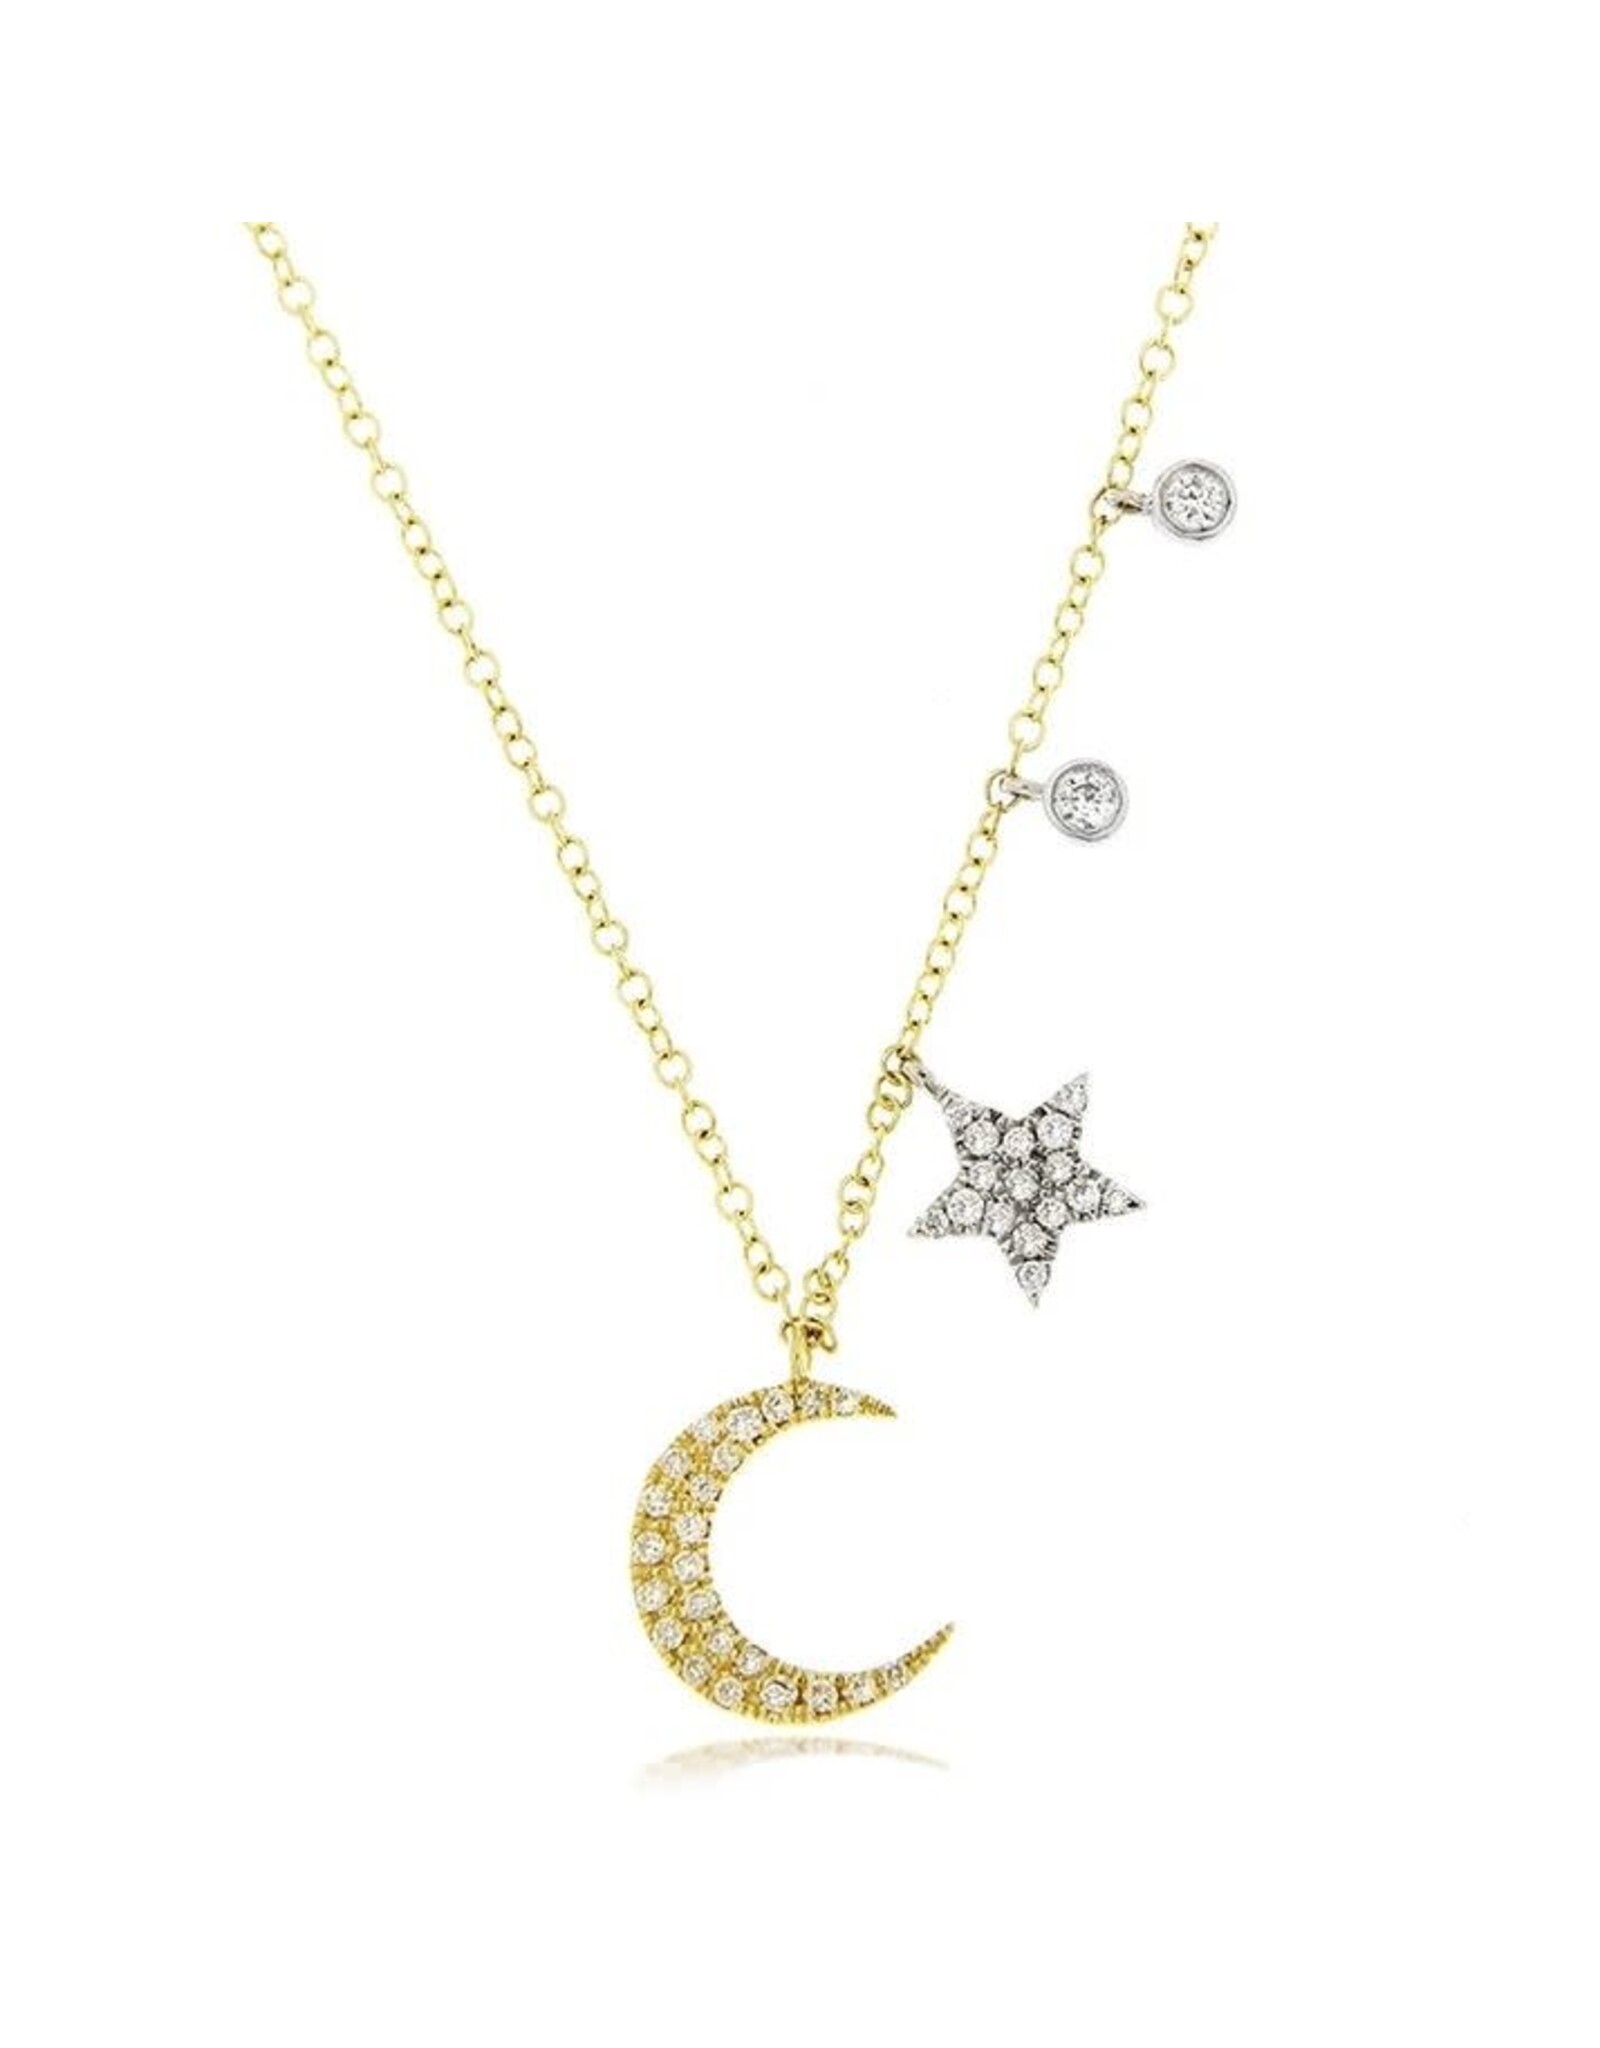 MEIRA T 14k Moon & Star Necklace